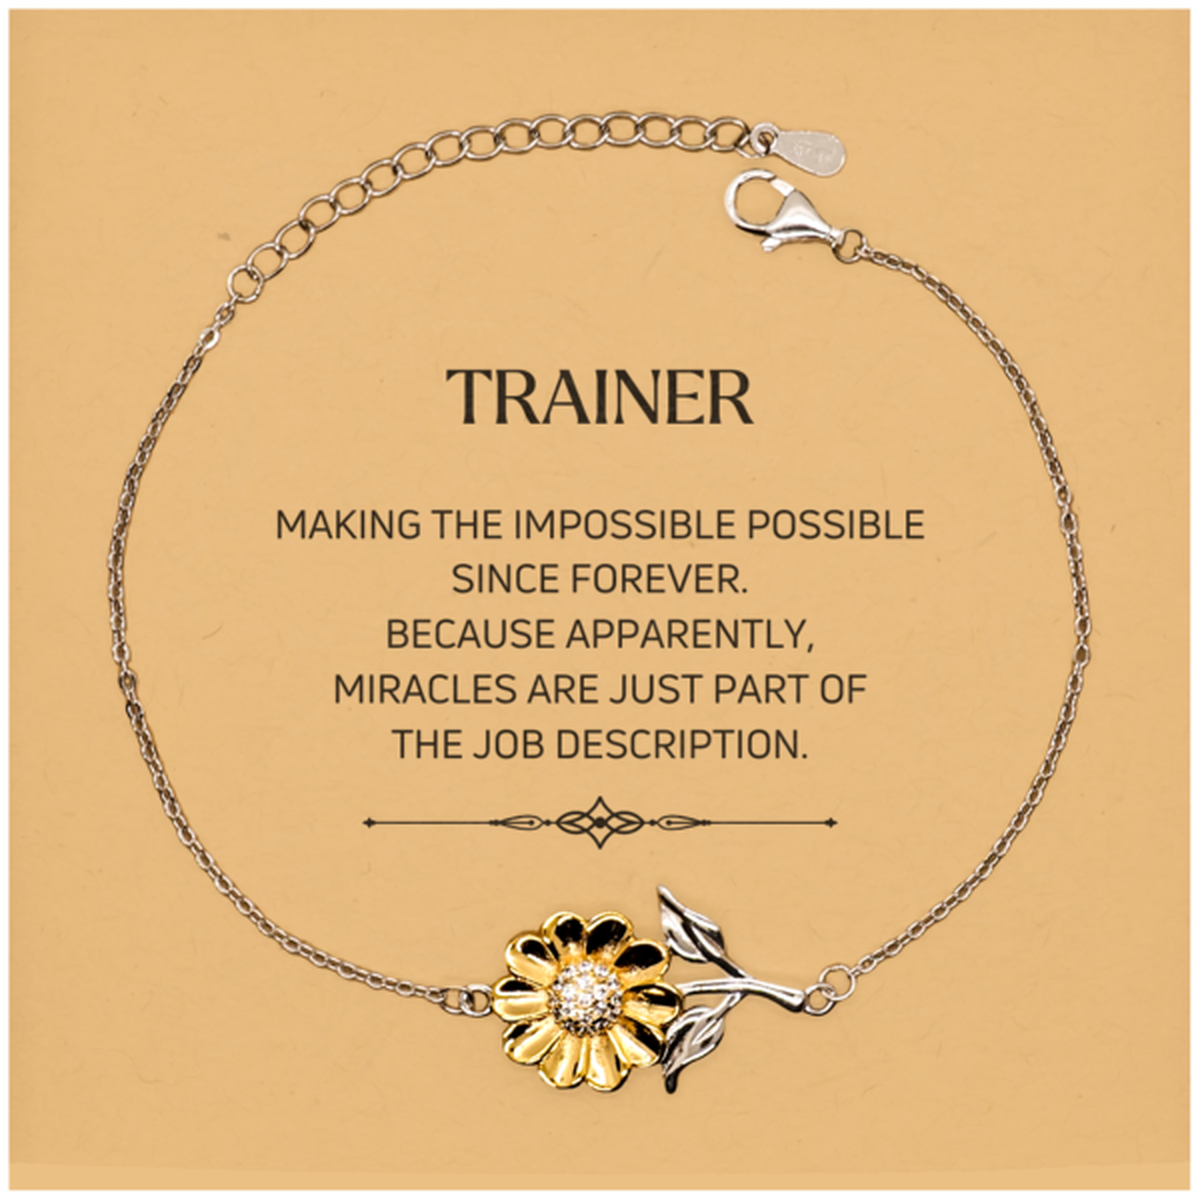 Funny Trainer Gifts, Miracles are just part of the job description, Inspirational Birthday Christmas Sunflower Bracelet For Trainer, Men, Women, Coworkers, Friends, Boss